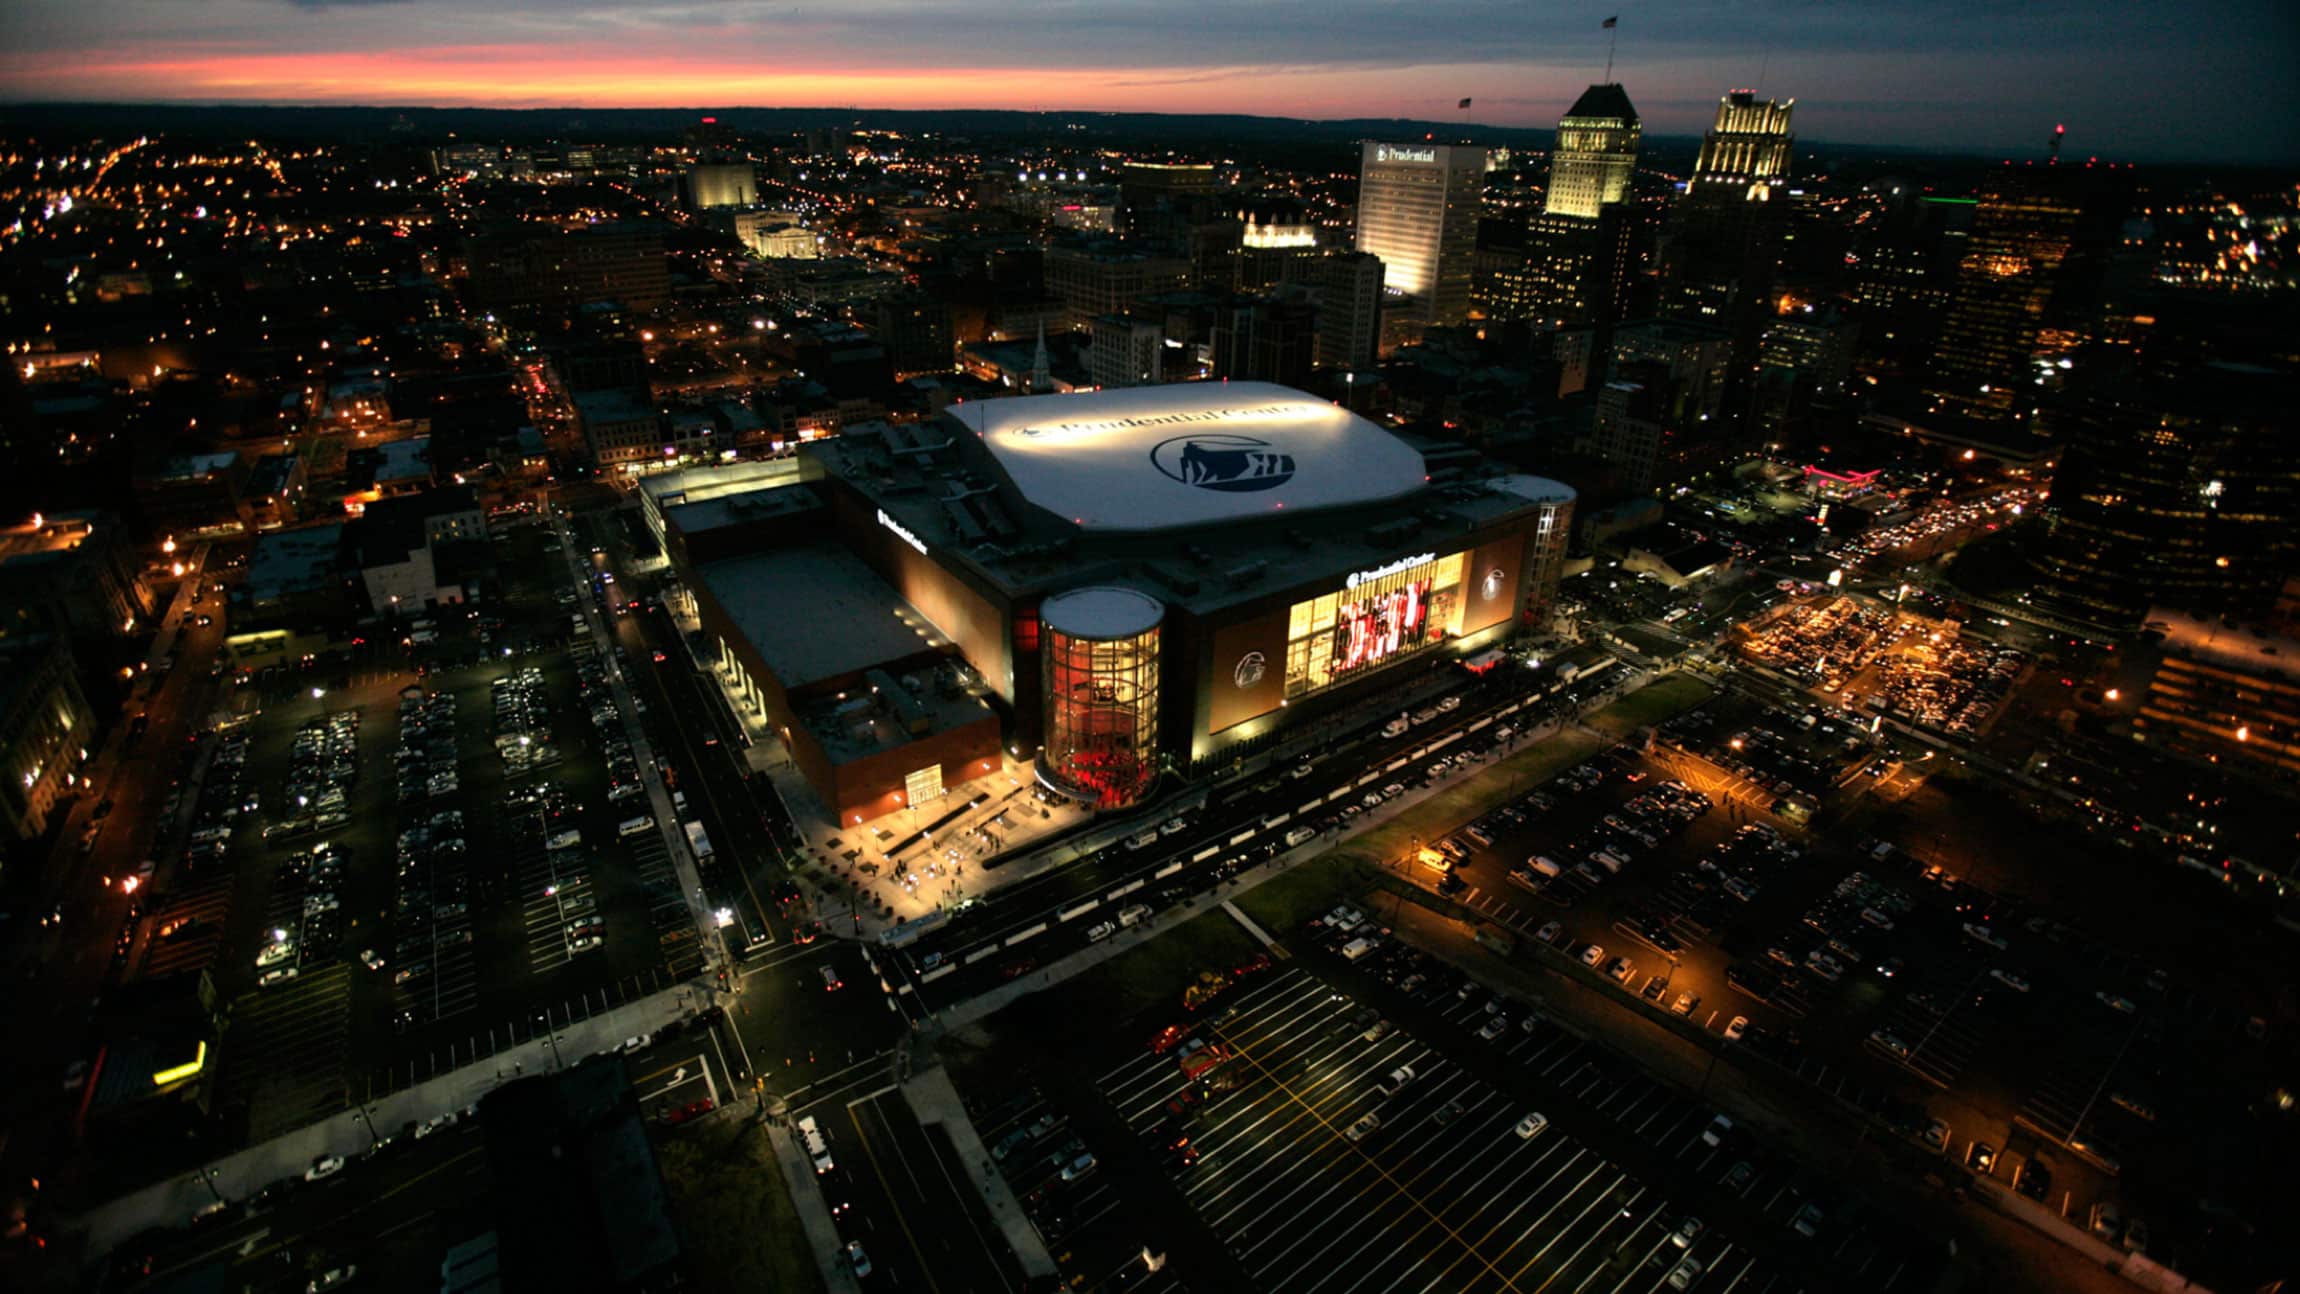 aerial view of Prudential Center at night